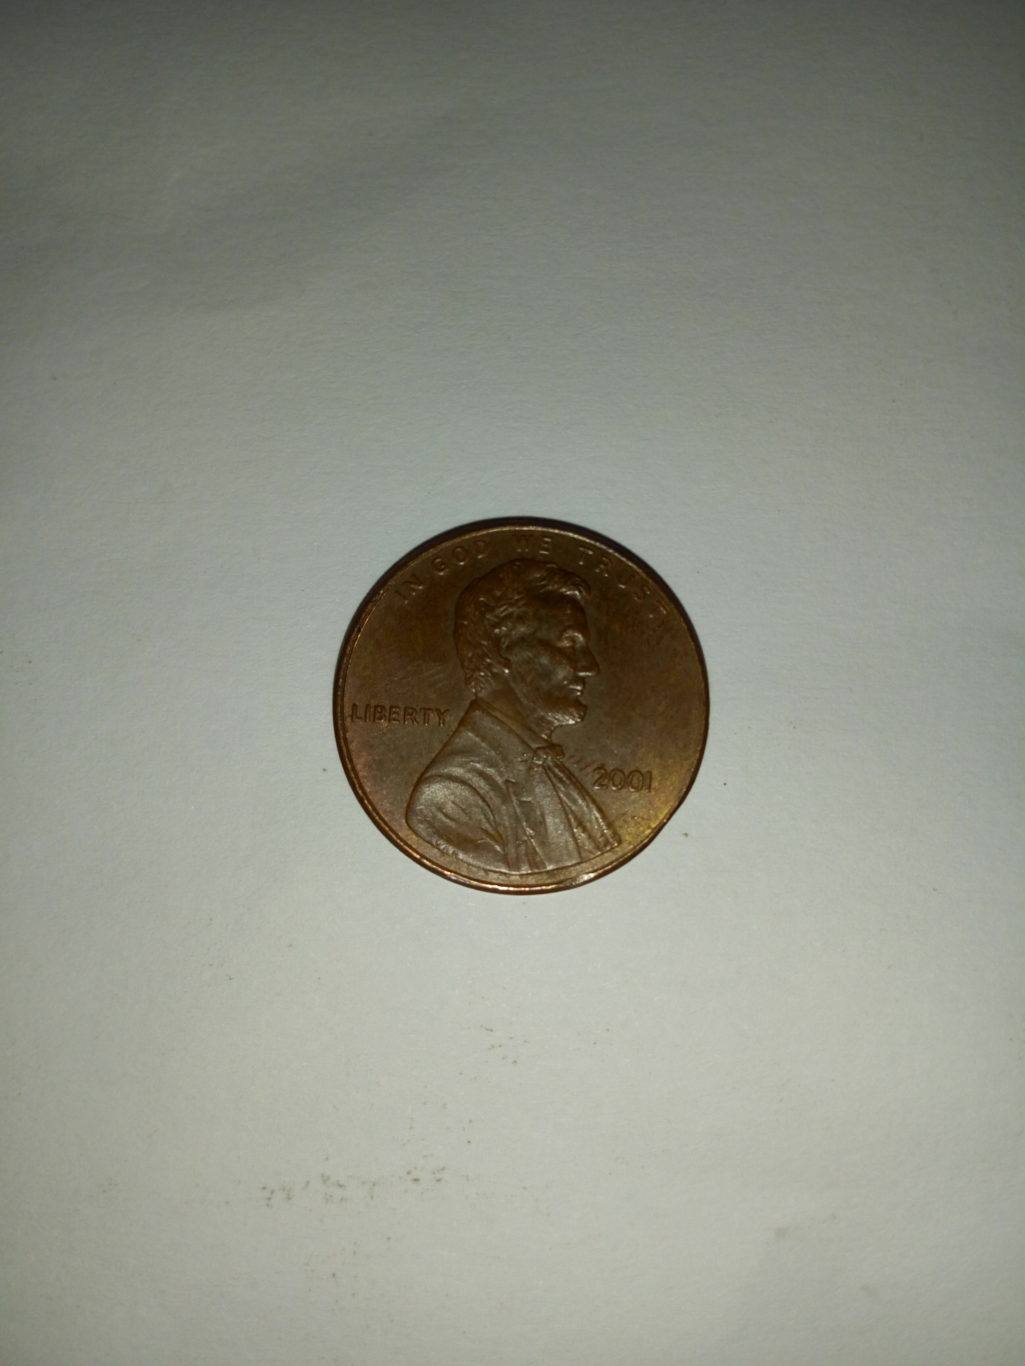 2001_ united States of america 1 cent